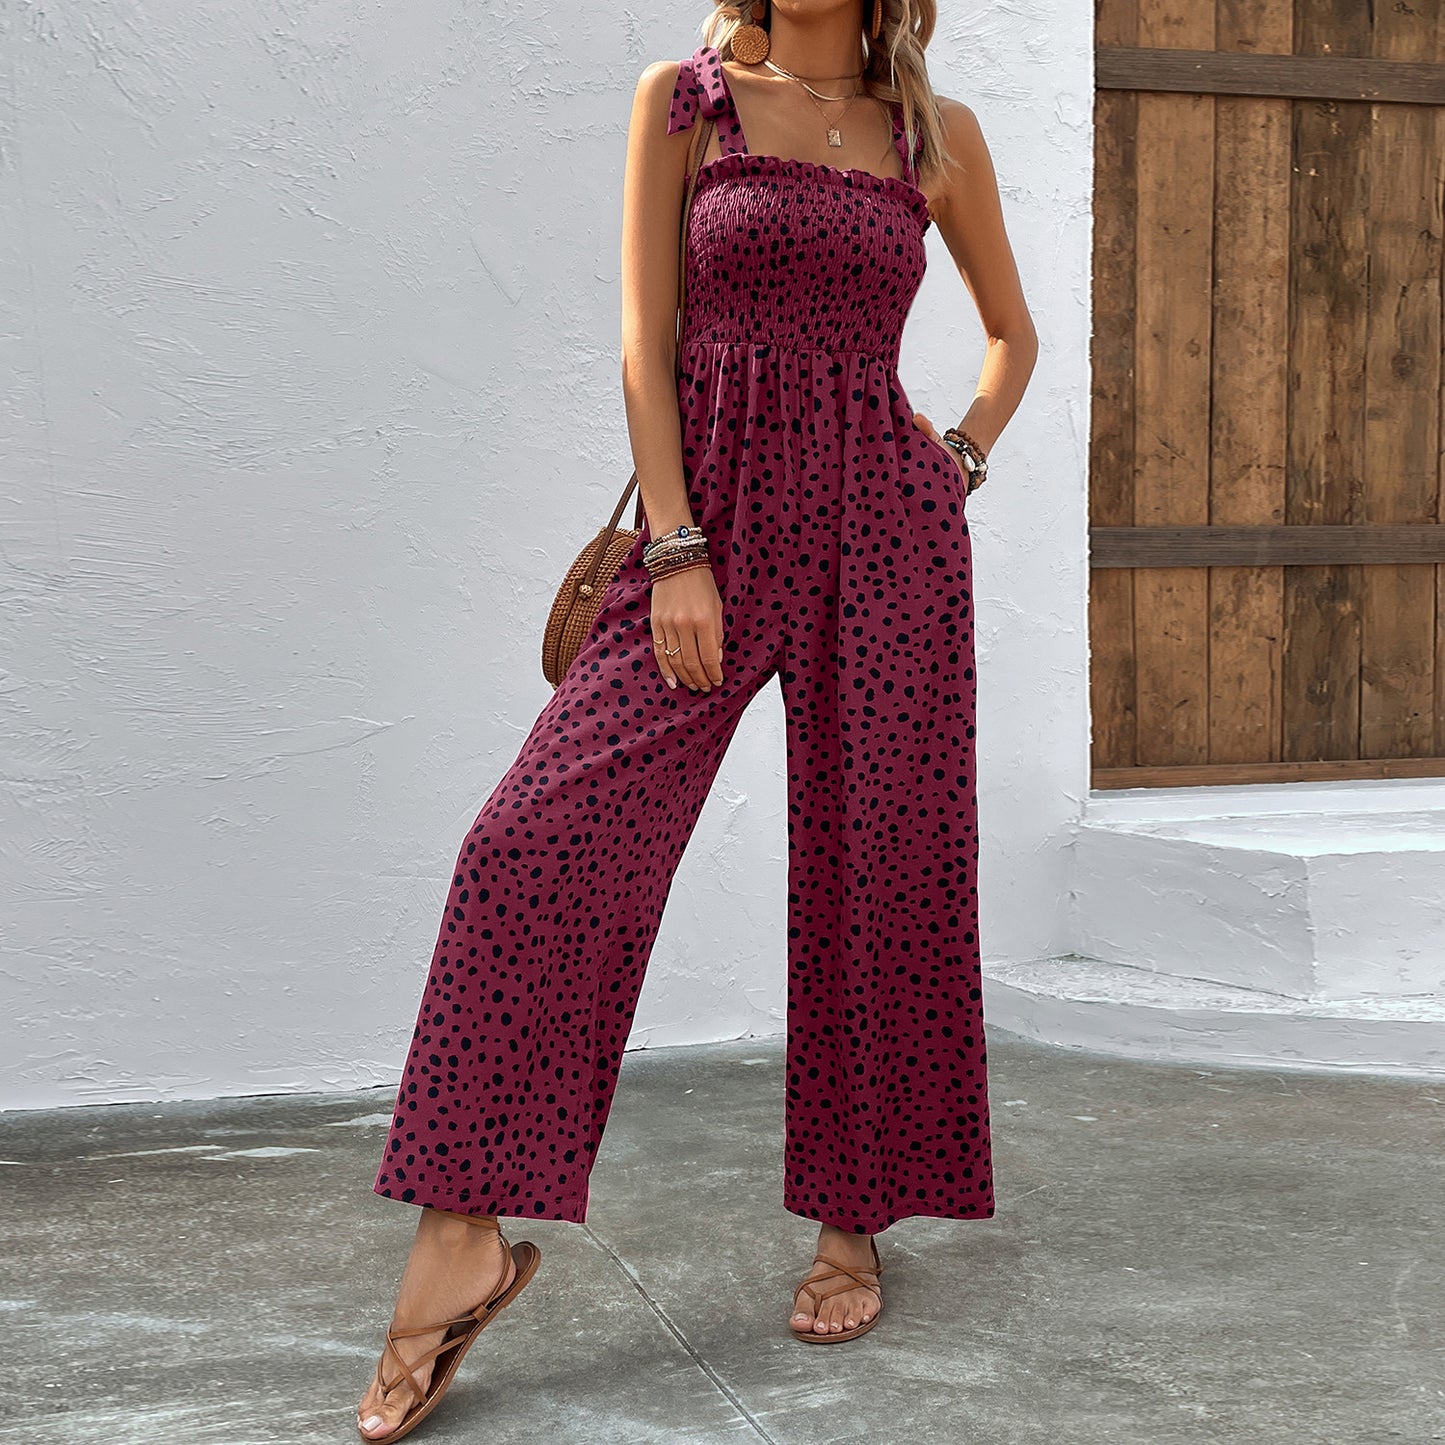 European and American Style Polka Dot Print Jumpsuit with Waist-Slimming Pocket Design